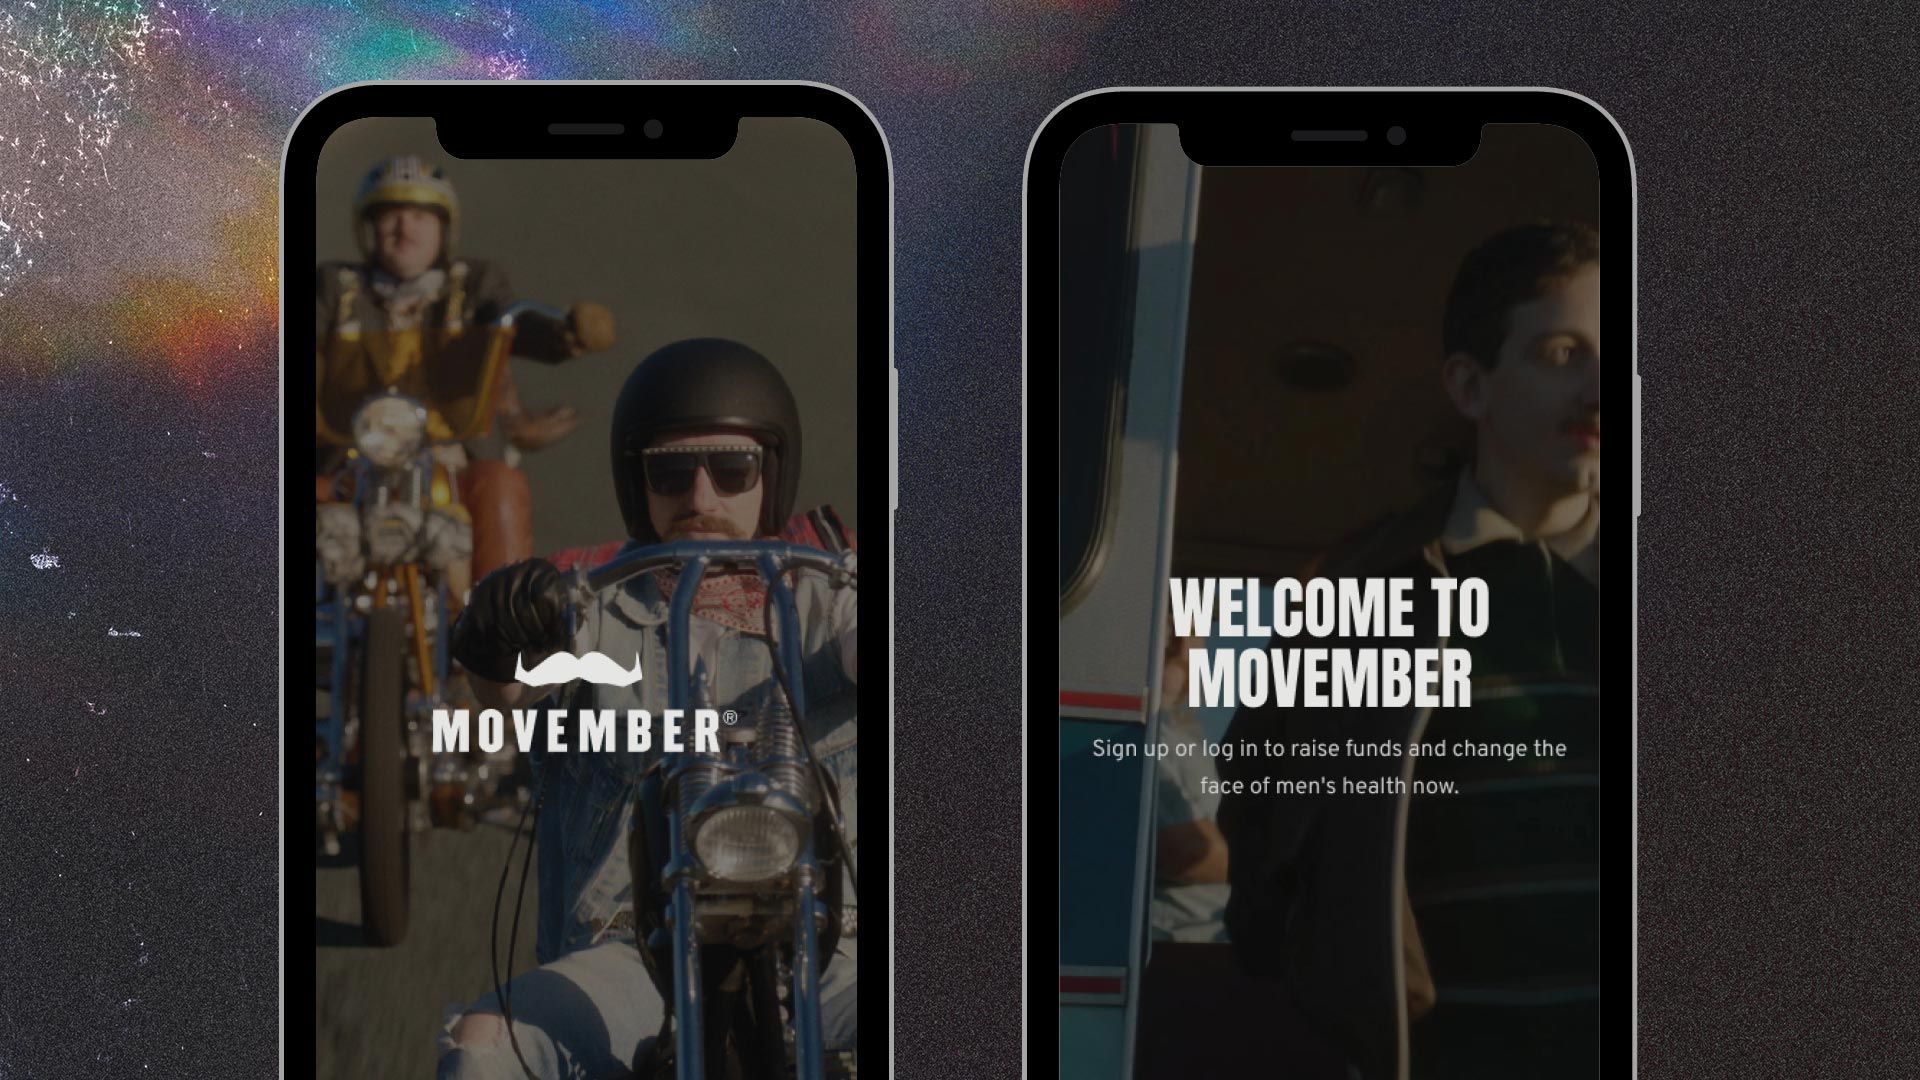 Images of two smartphones, showing the opening screens for the Movember app.